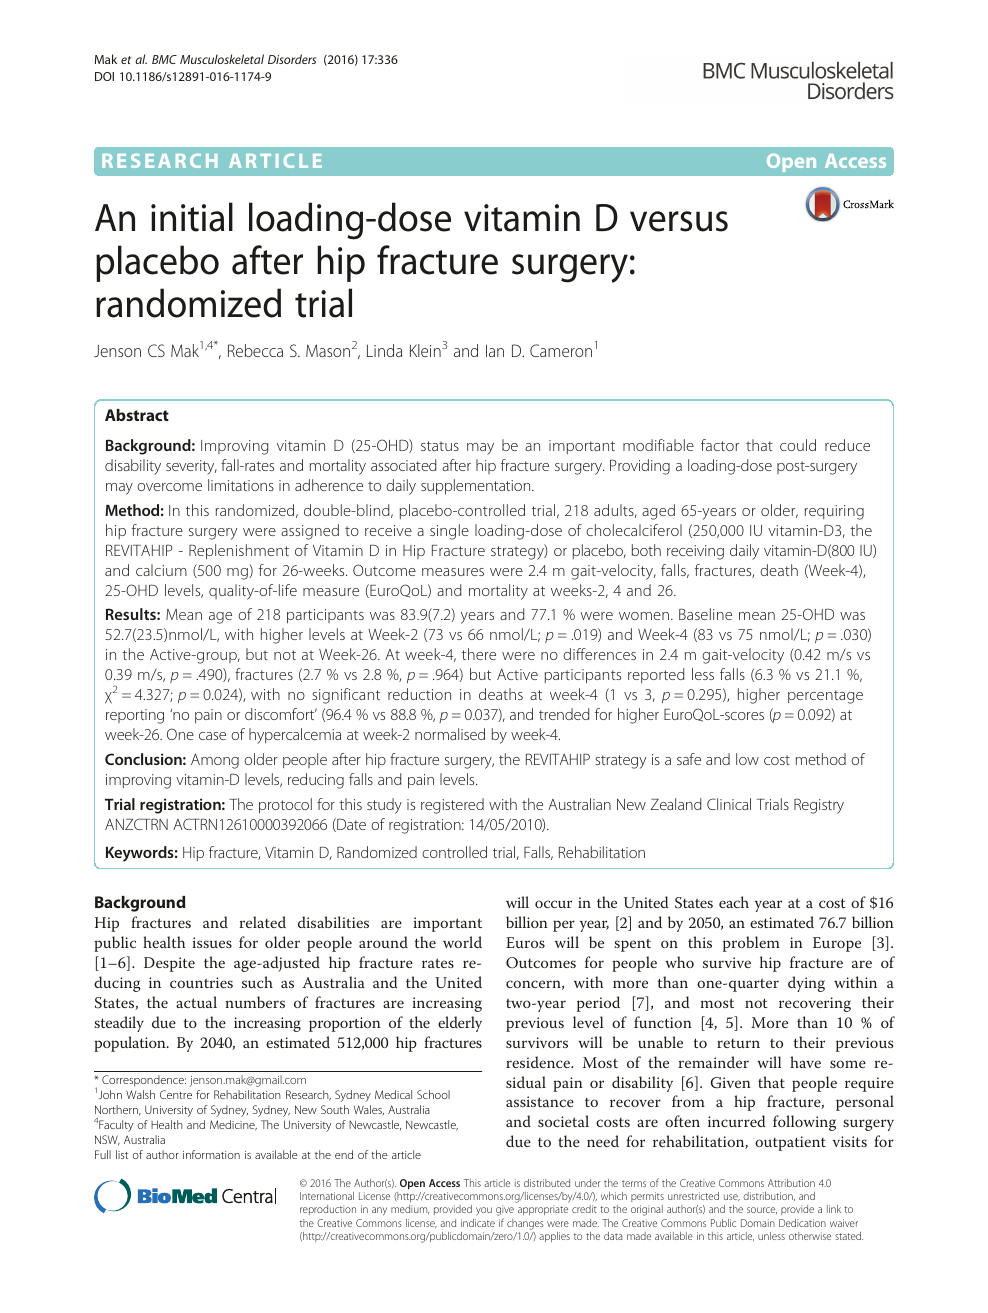 An initial loading-dose vitamin D versus placebo after hip